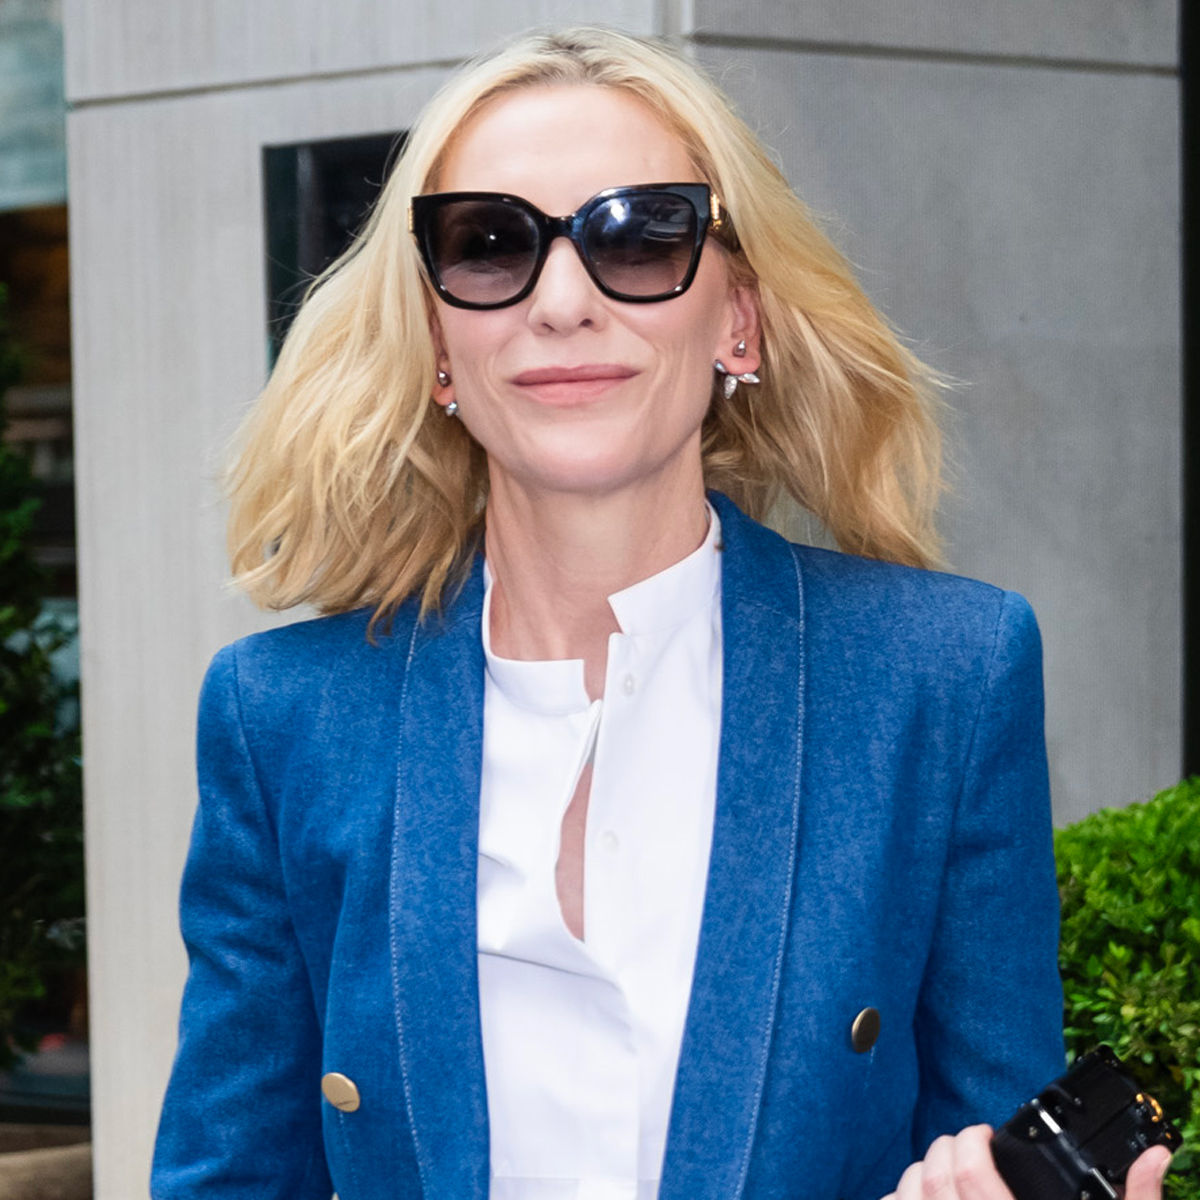 Royal as ever, Cate Blanchett wears Christian Louboutin shoes on